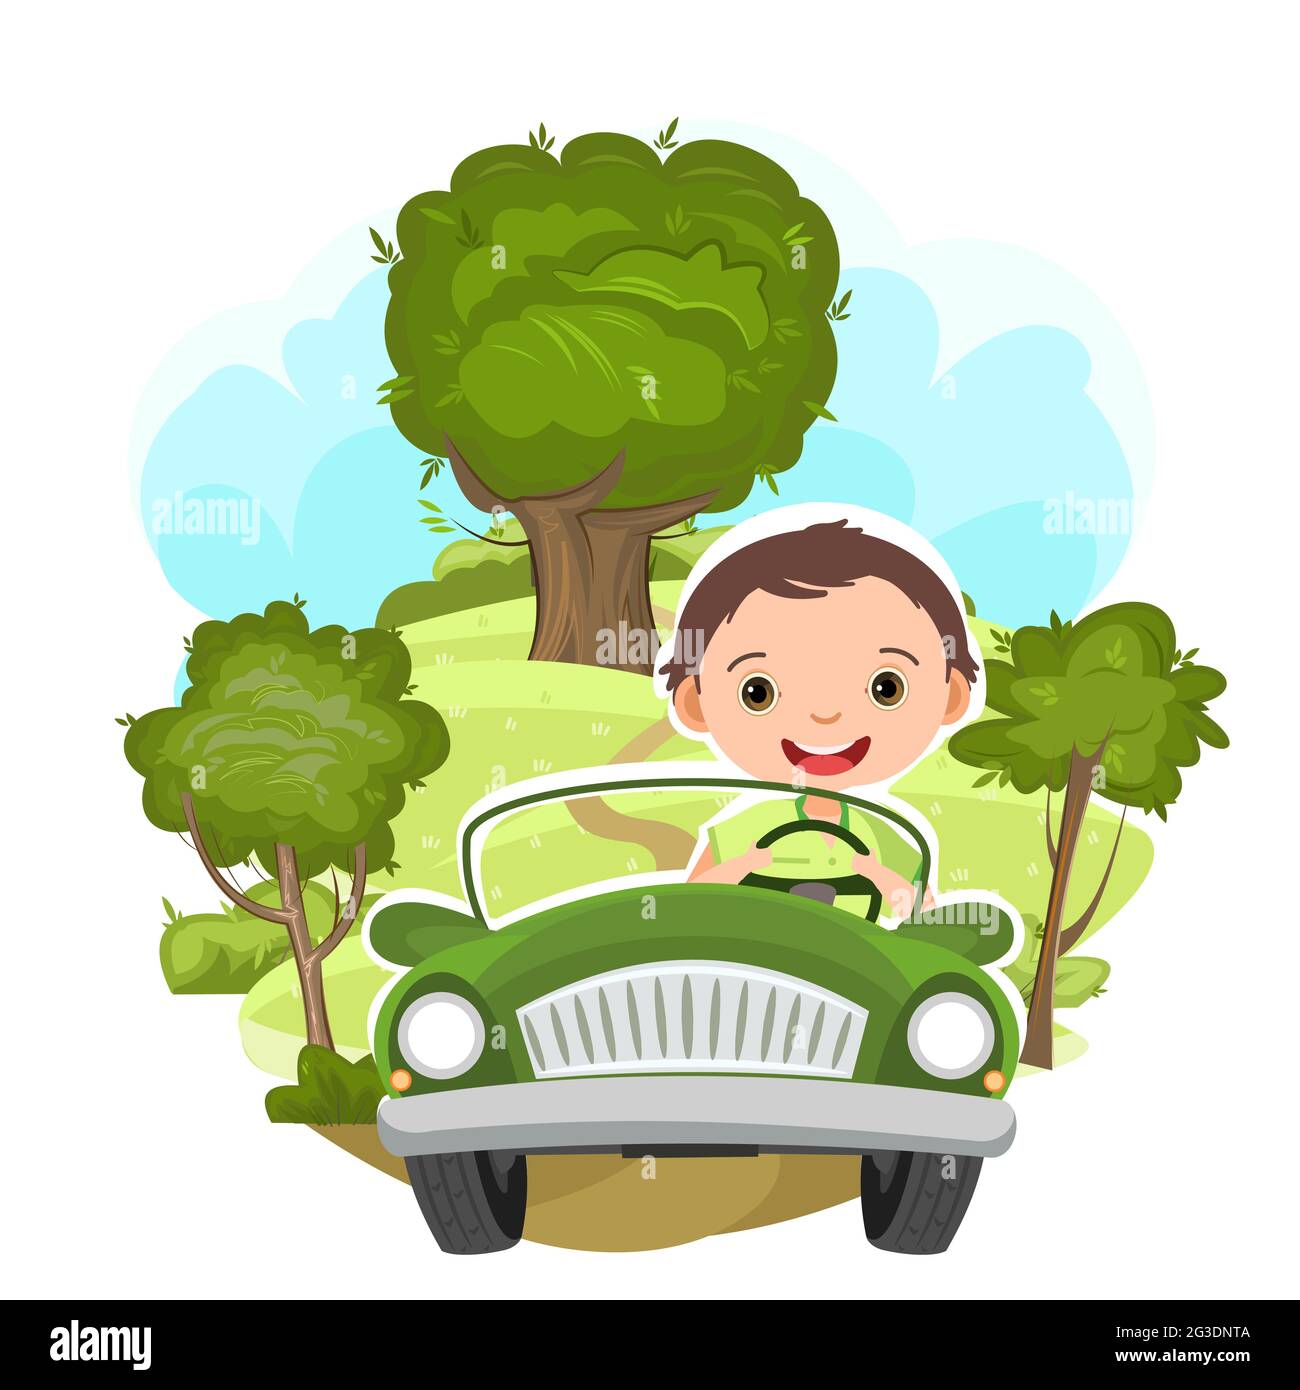 Childrens trip in a small car. Kid boy drives a pedal or electric toy automobile. Cartoon illustration. Isolated. Summer rural landscape. Vector Stock Vector